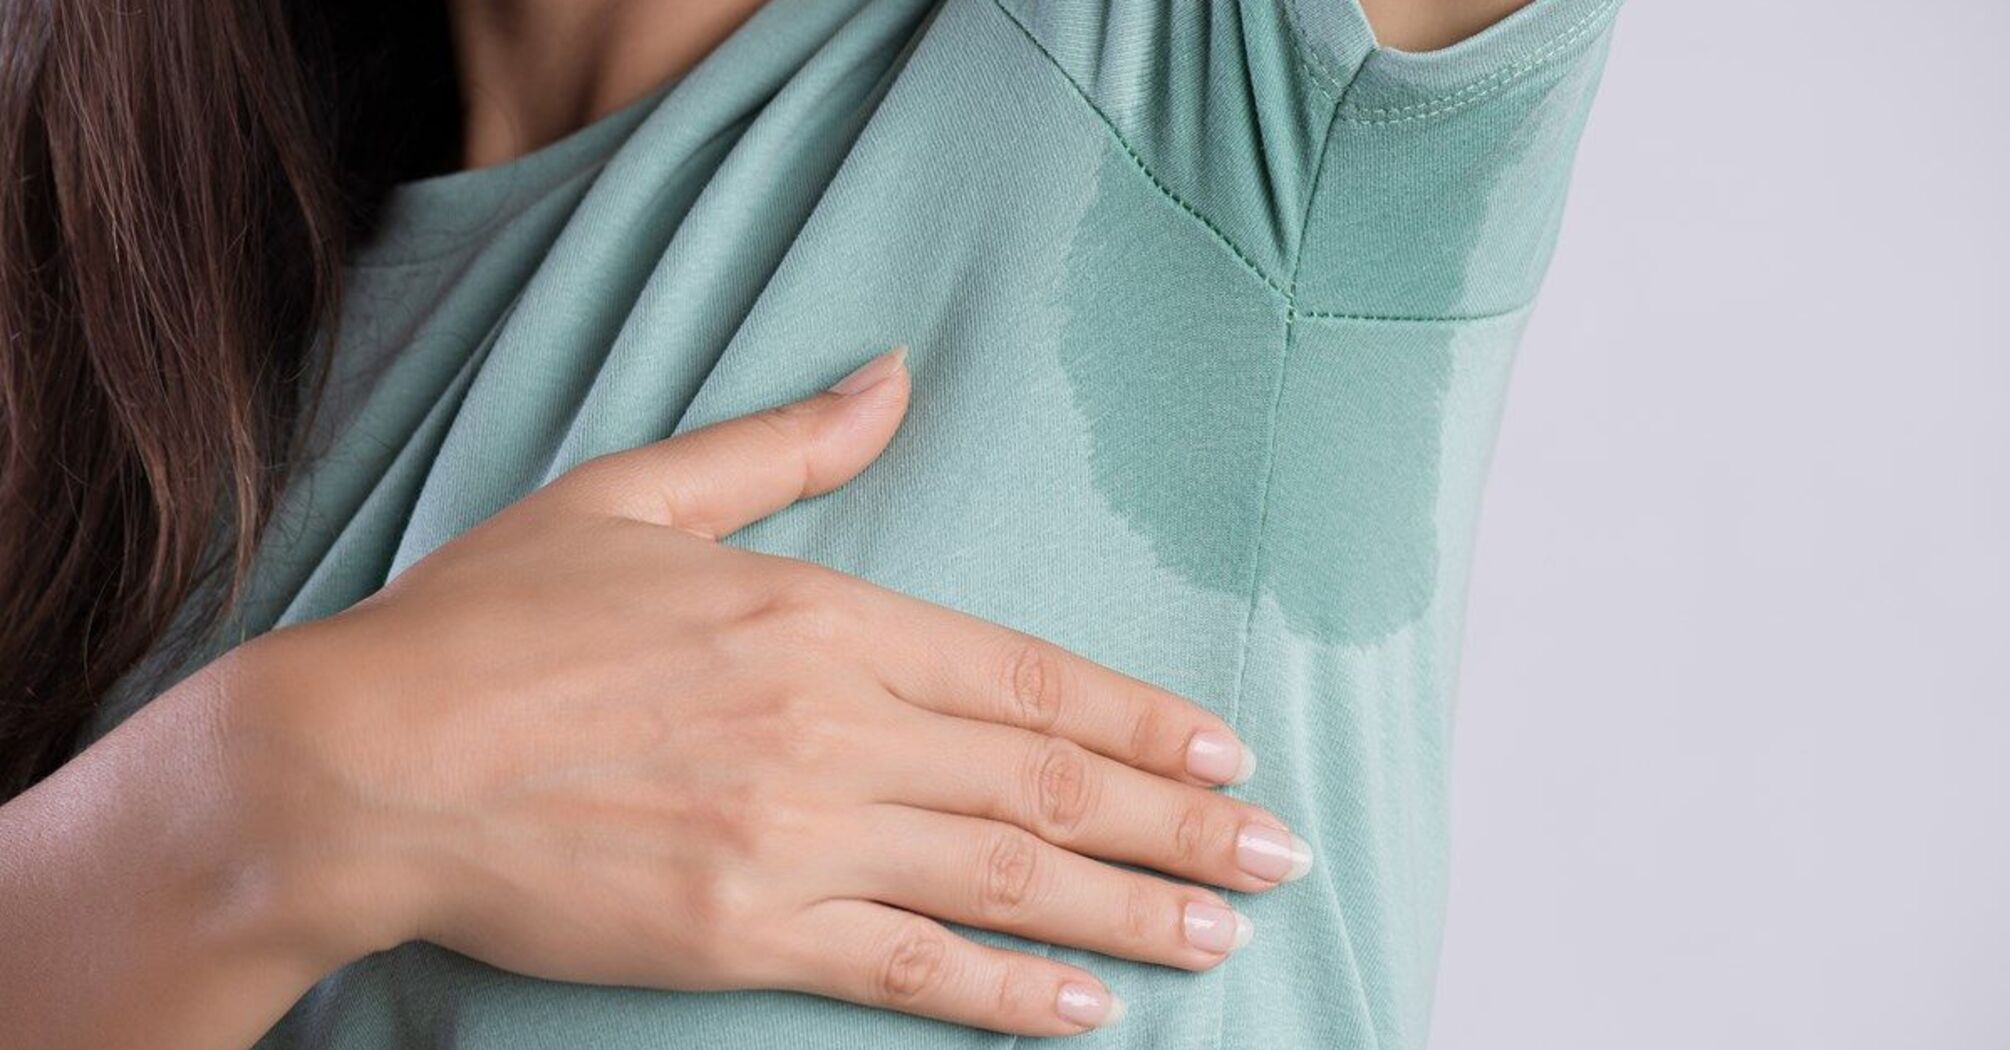 How to remove sweat stains from clothes